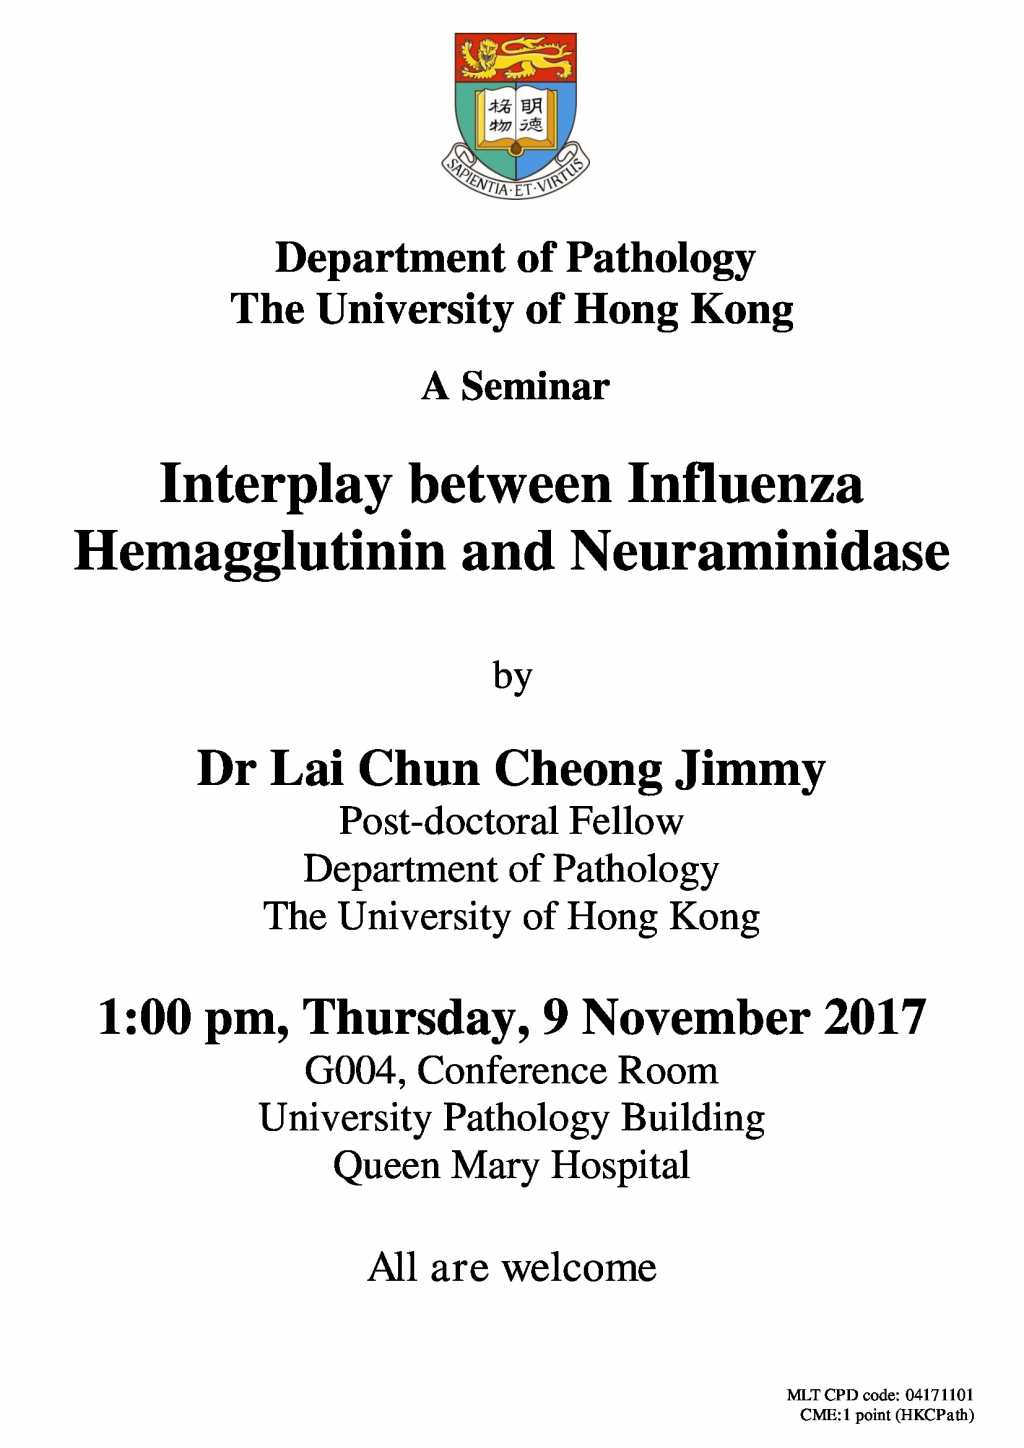 A Seminar on Interplay between Influenza Hemagglutinin and Neuraminidase by Dr Jimmy Lai on 9 Nov (1pm)